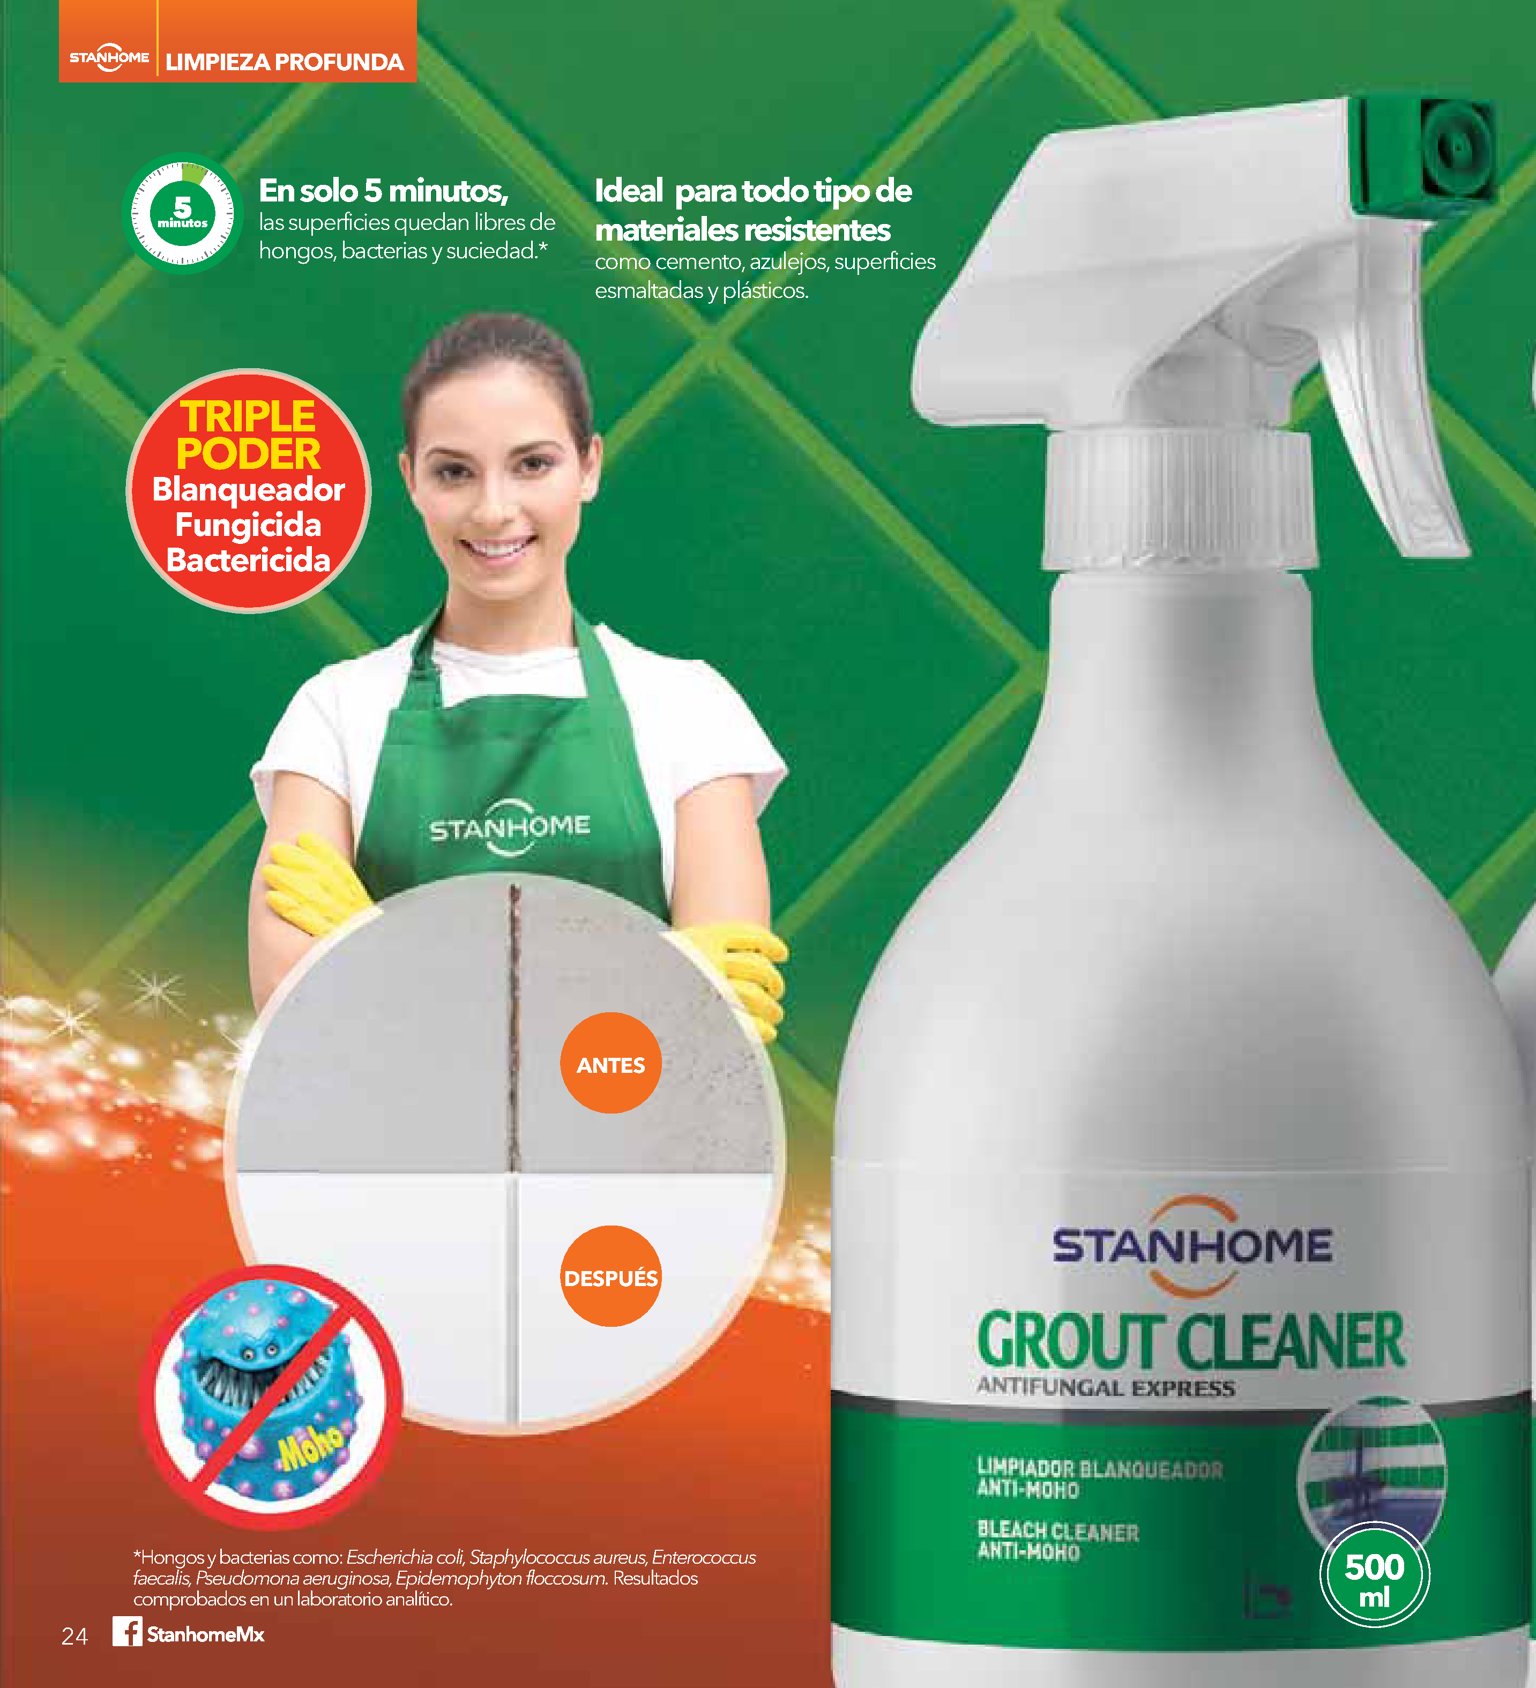 Stanhome Grout Cleaner Limpiador Anti Moho 500 Ml - $ 140